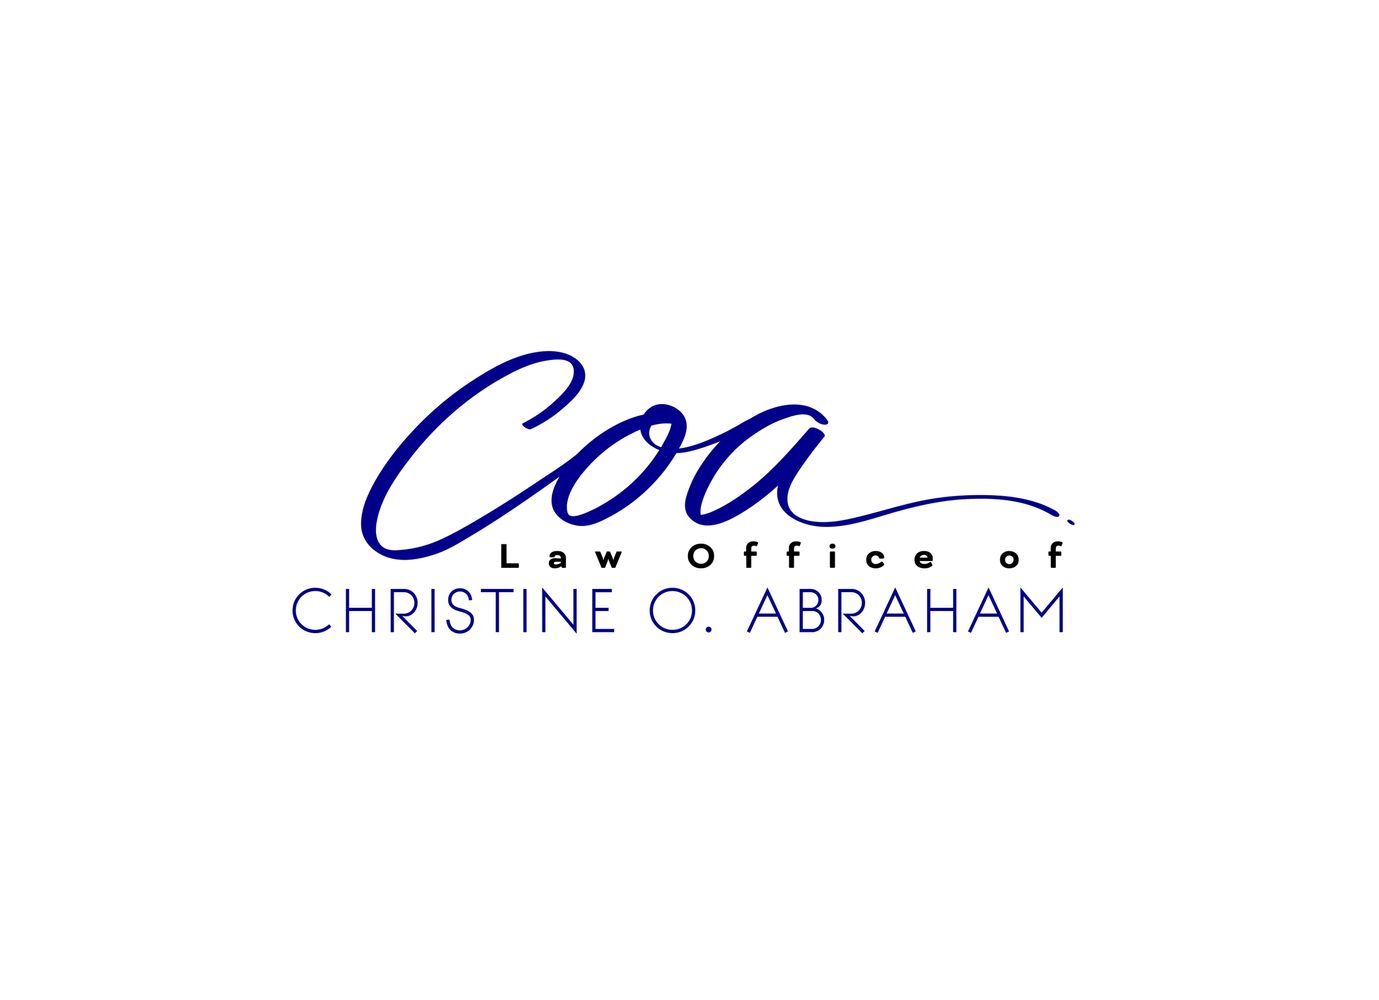 Law Office of Christine O. Abraham